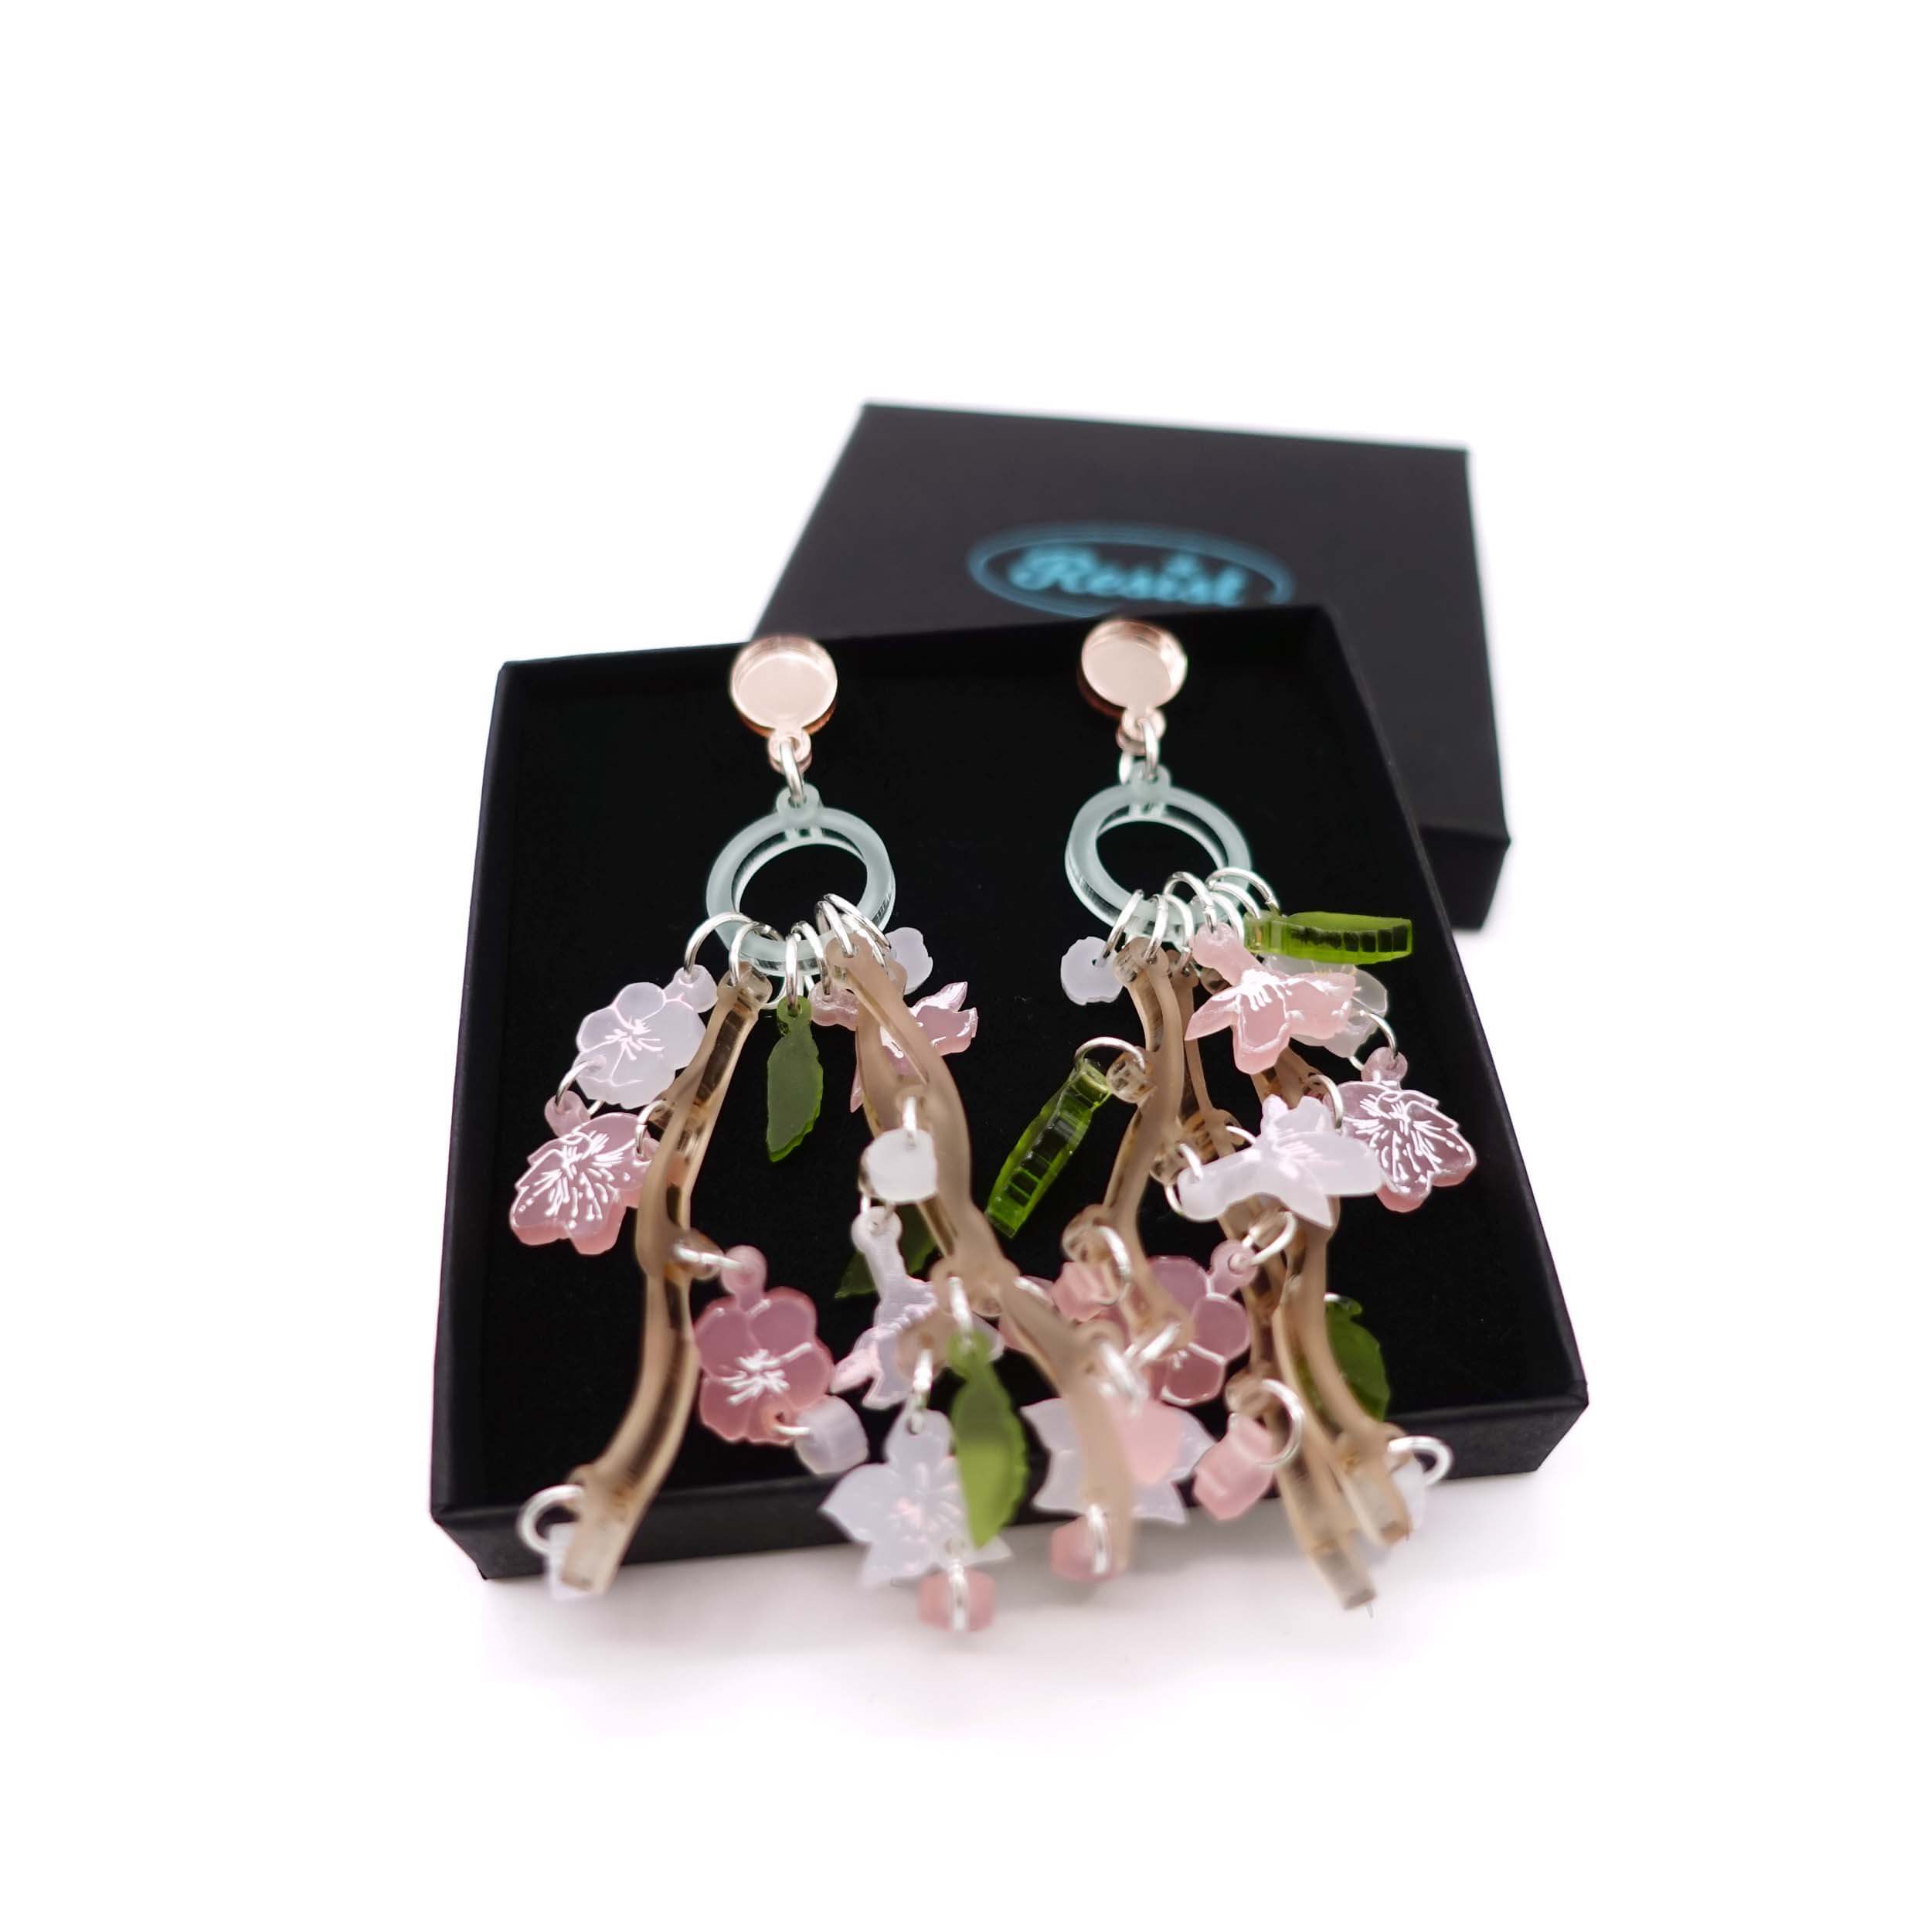 Cherry Blossom limited edition statement earrings designed by Sarah Day for Wear and Resist shown in a gift box. 